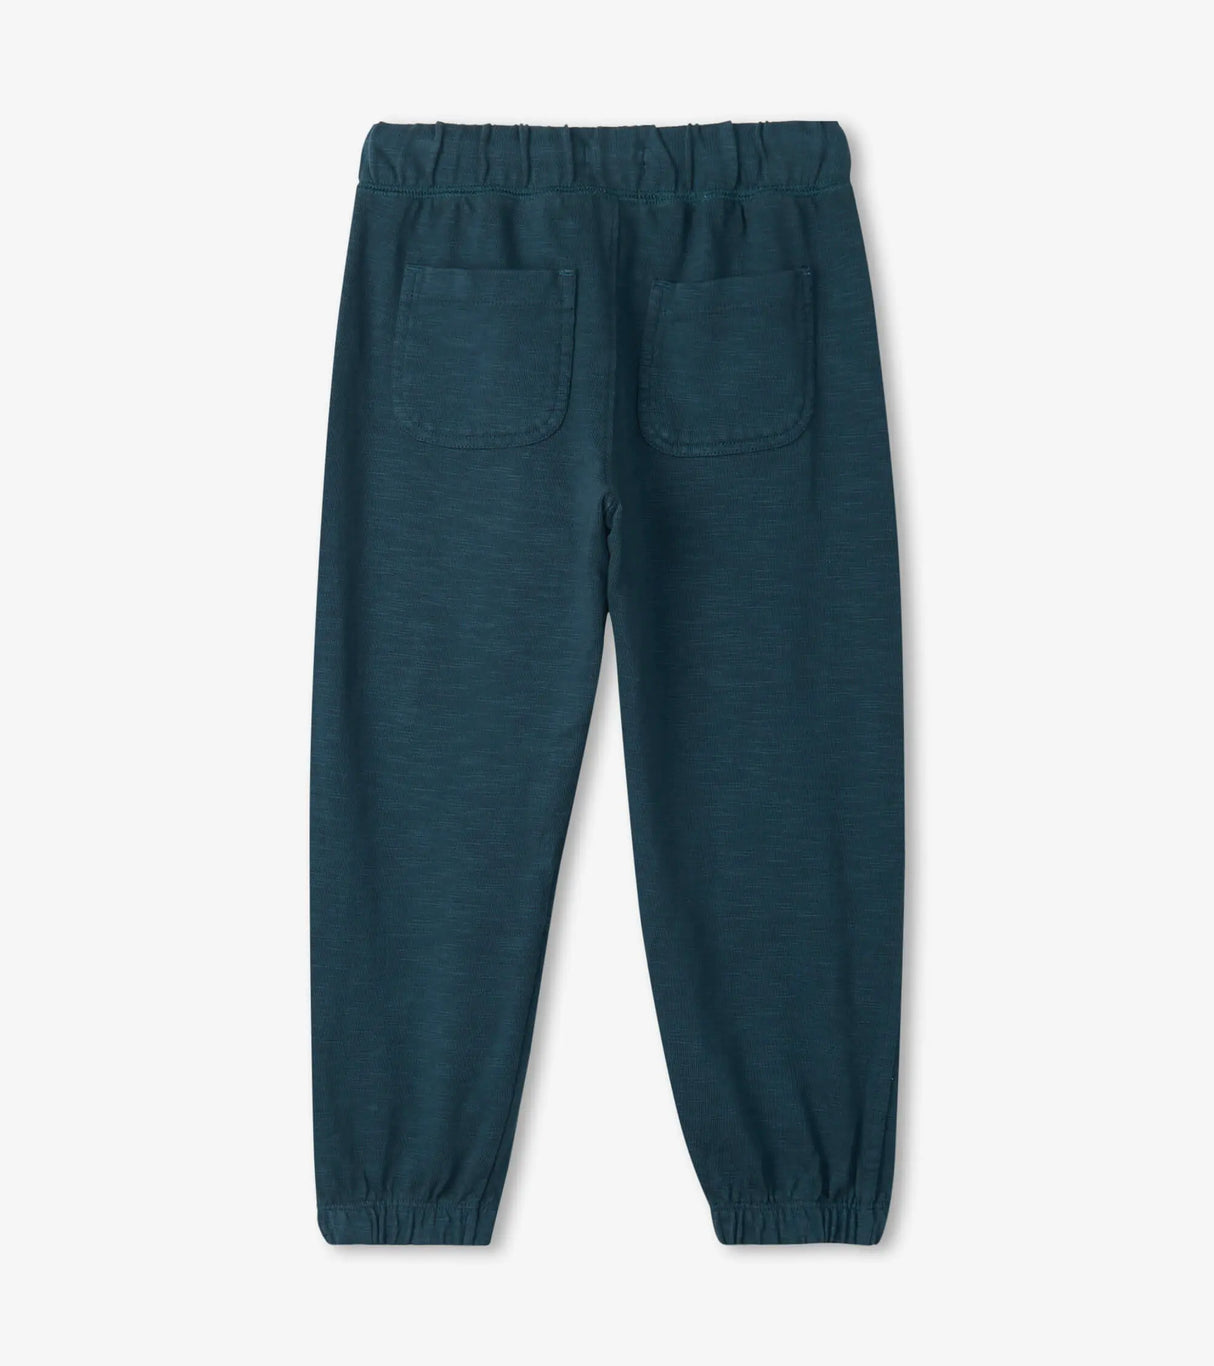 Buy Midnight Navy Relaxed Joggers, Hatley online